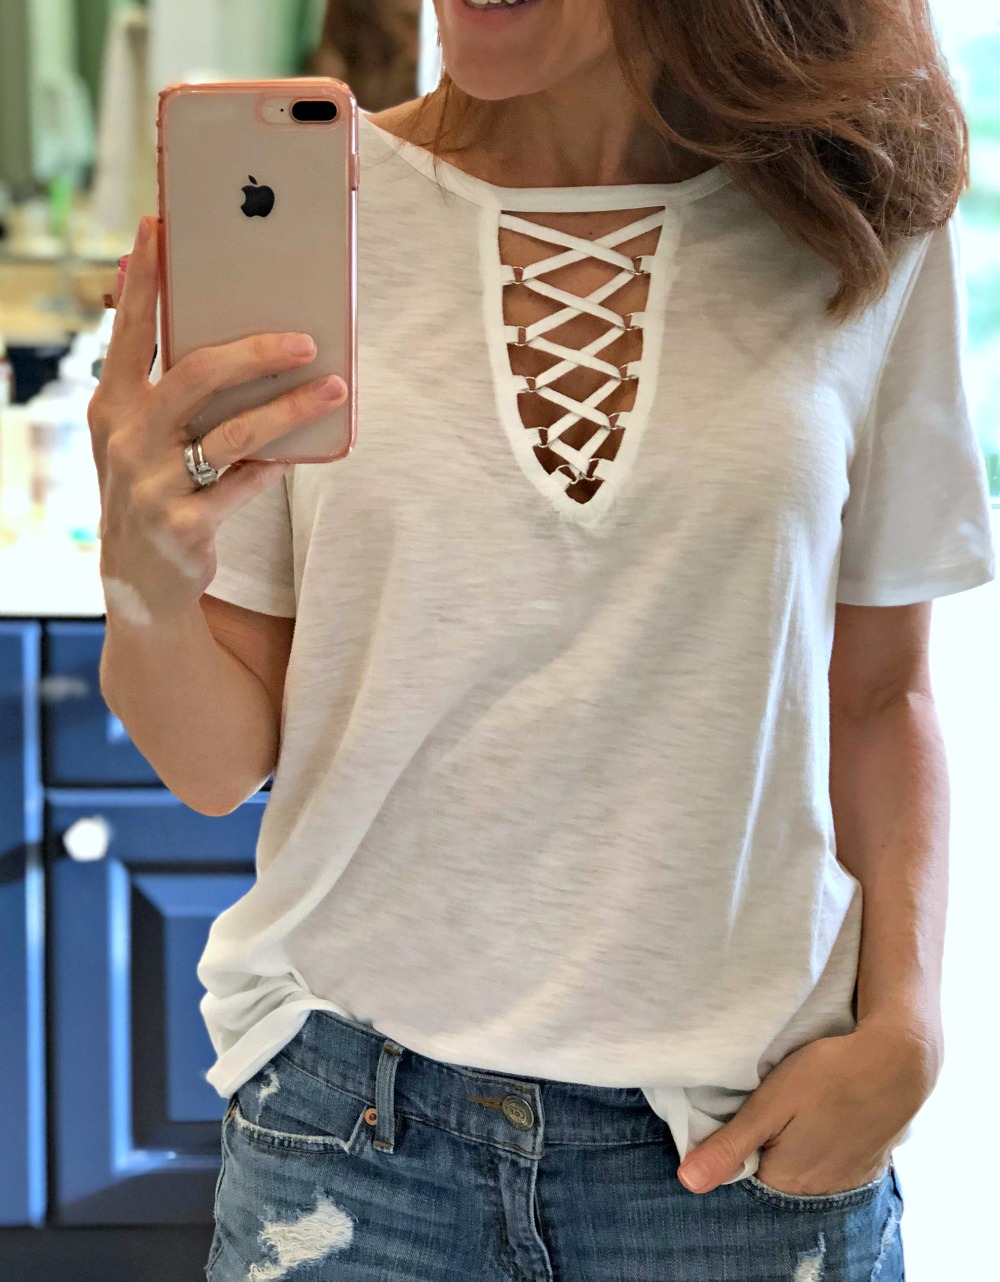 The t-shirt update: six tees worth adding to your closet now // the modern savvy - The Six Cutest Fall TShirts For Your Wardrobe by popular Florida fashion blogger The Modern Savvy